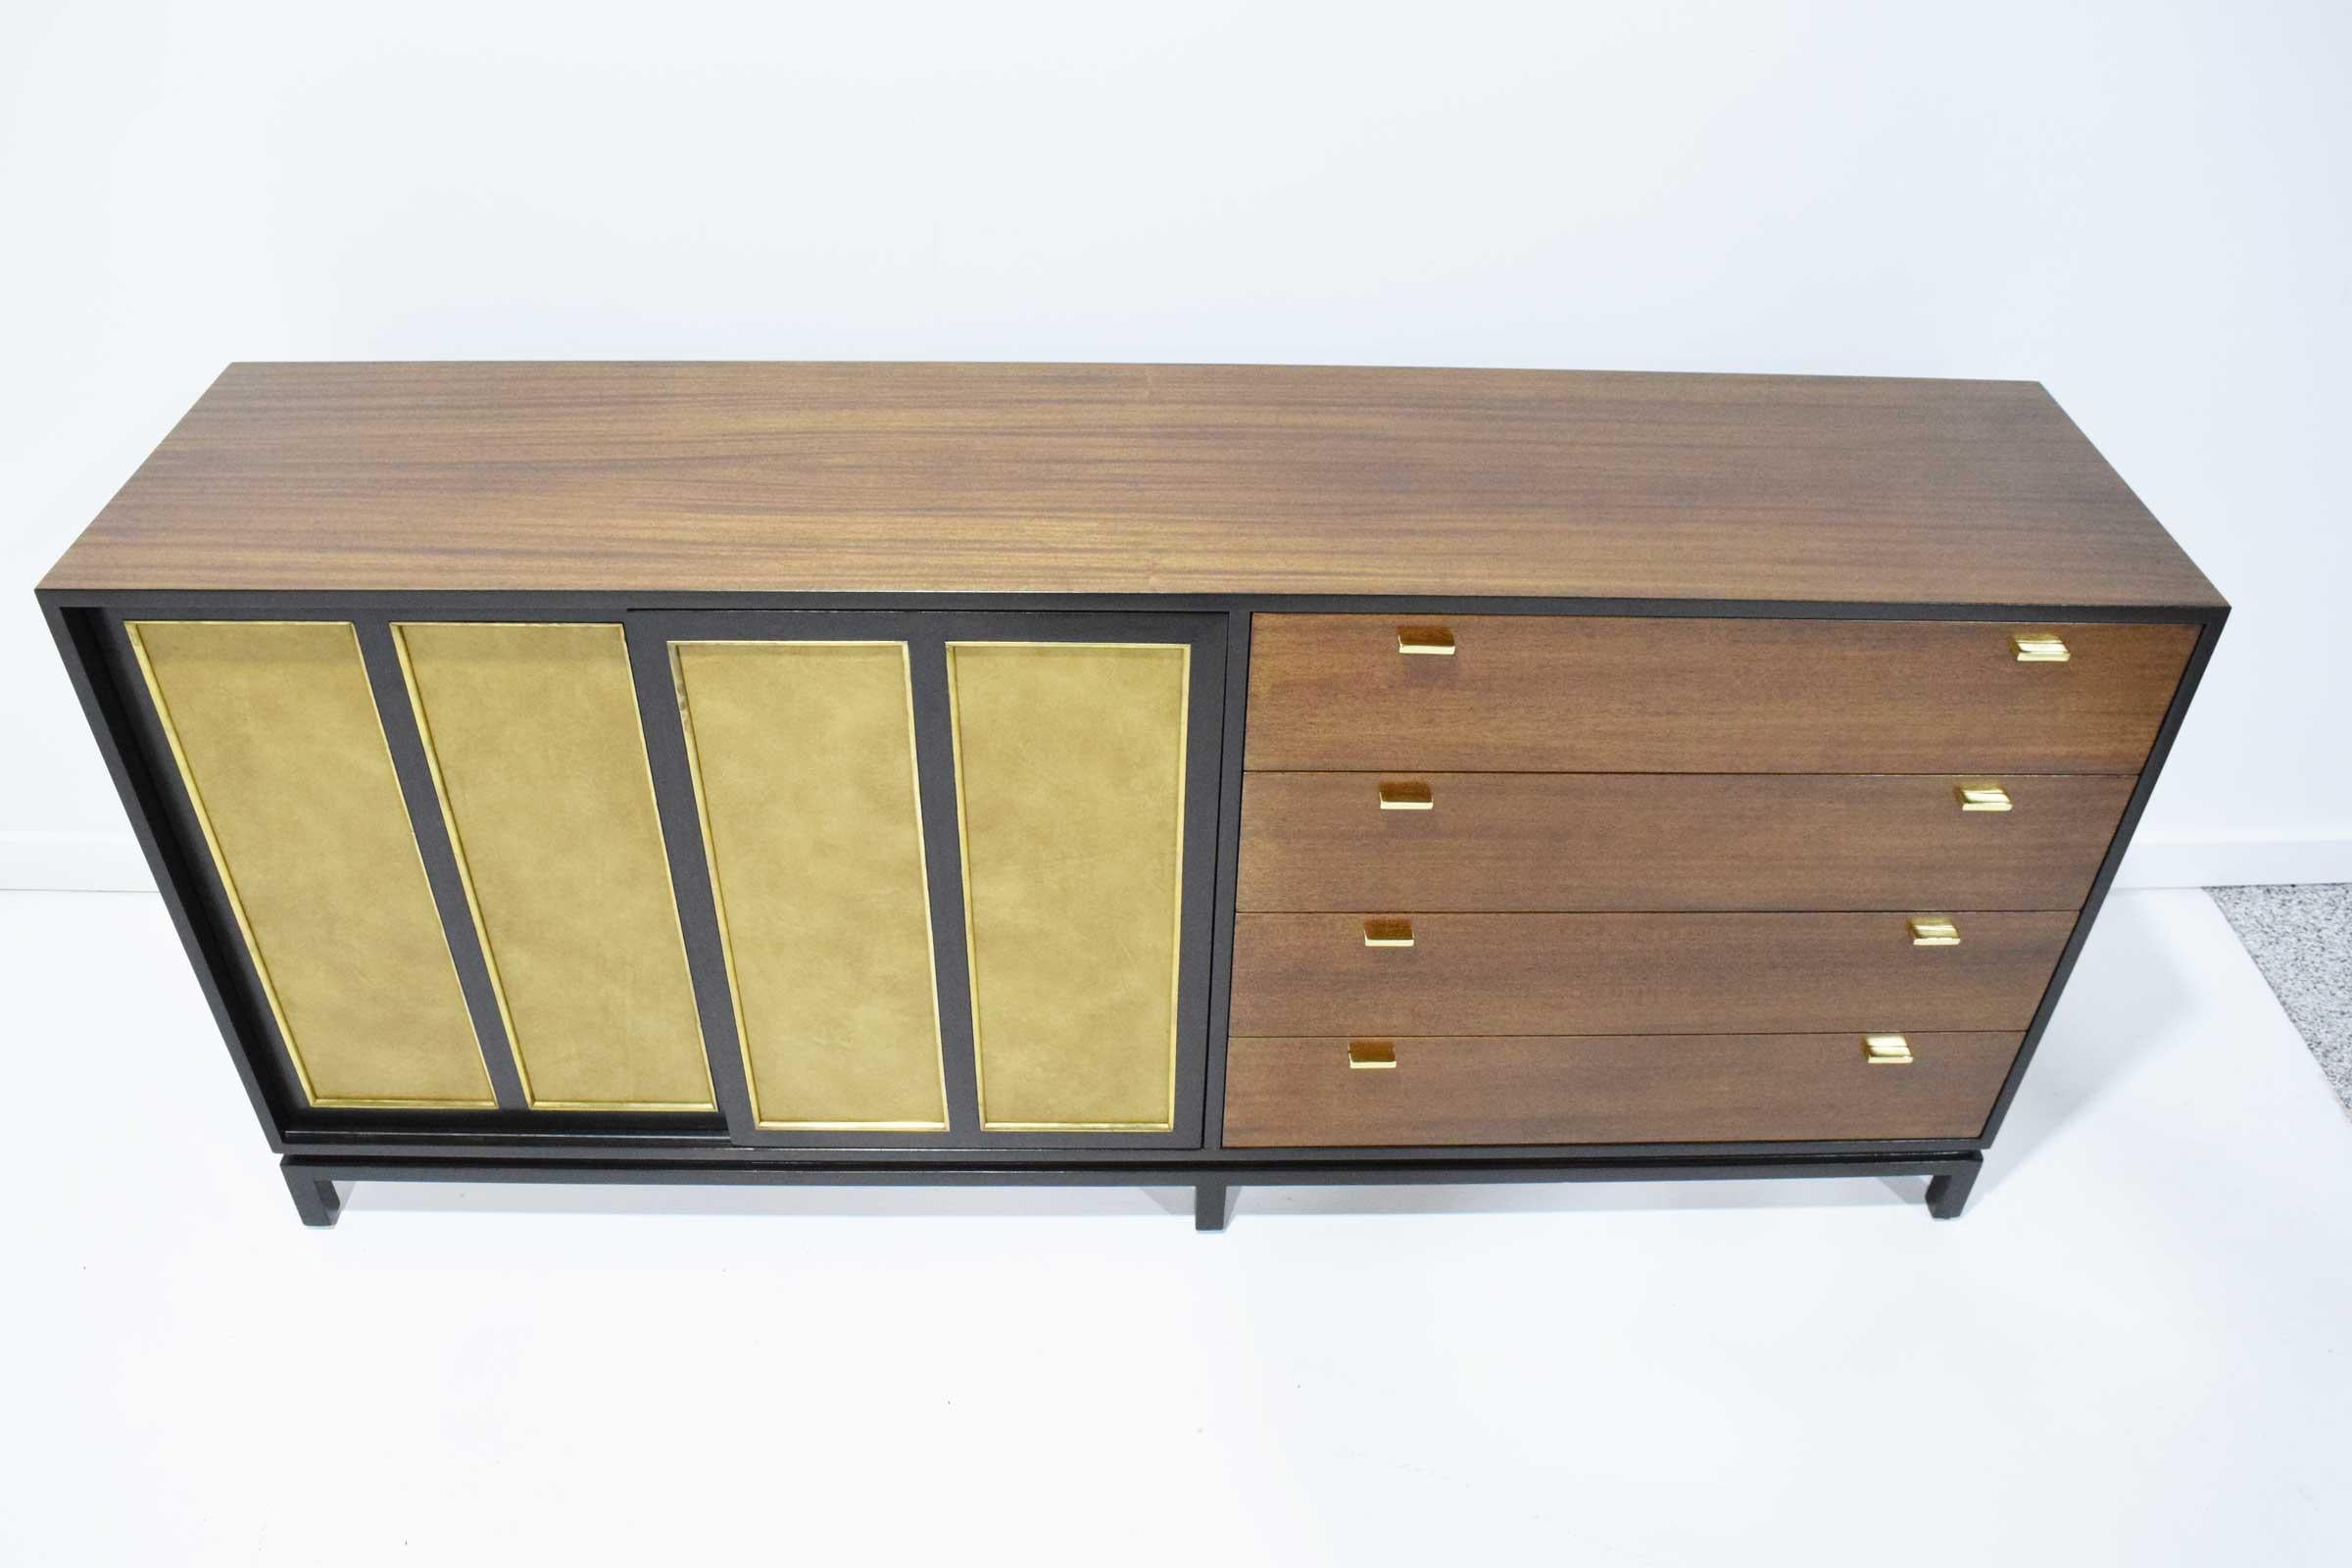 Harvey Probber Signed Sideboard in Mahogany with Gold Trim, 1960s For Sale 2